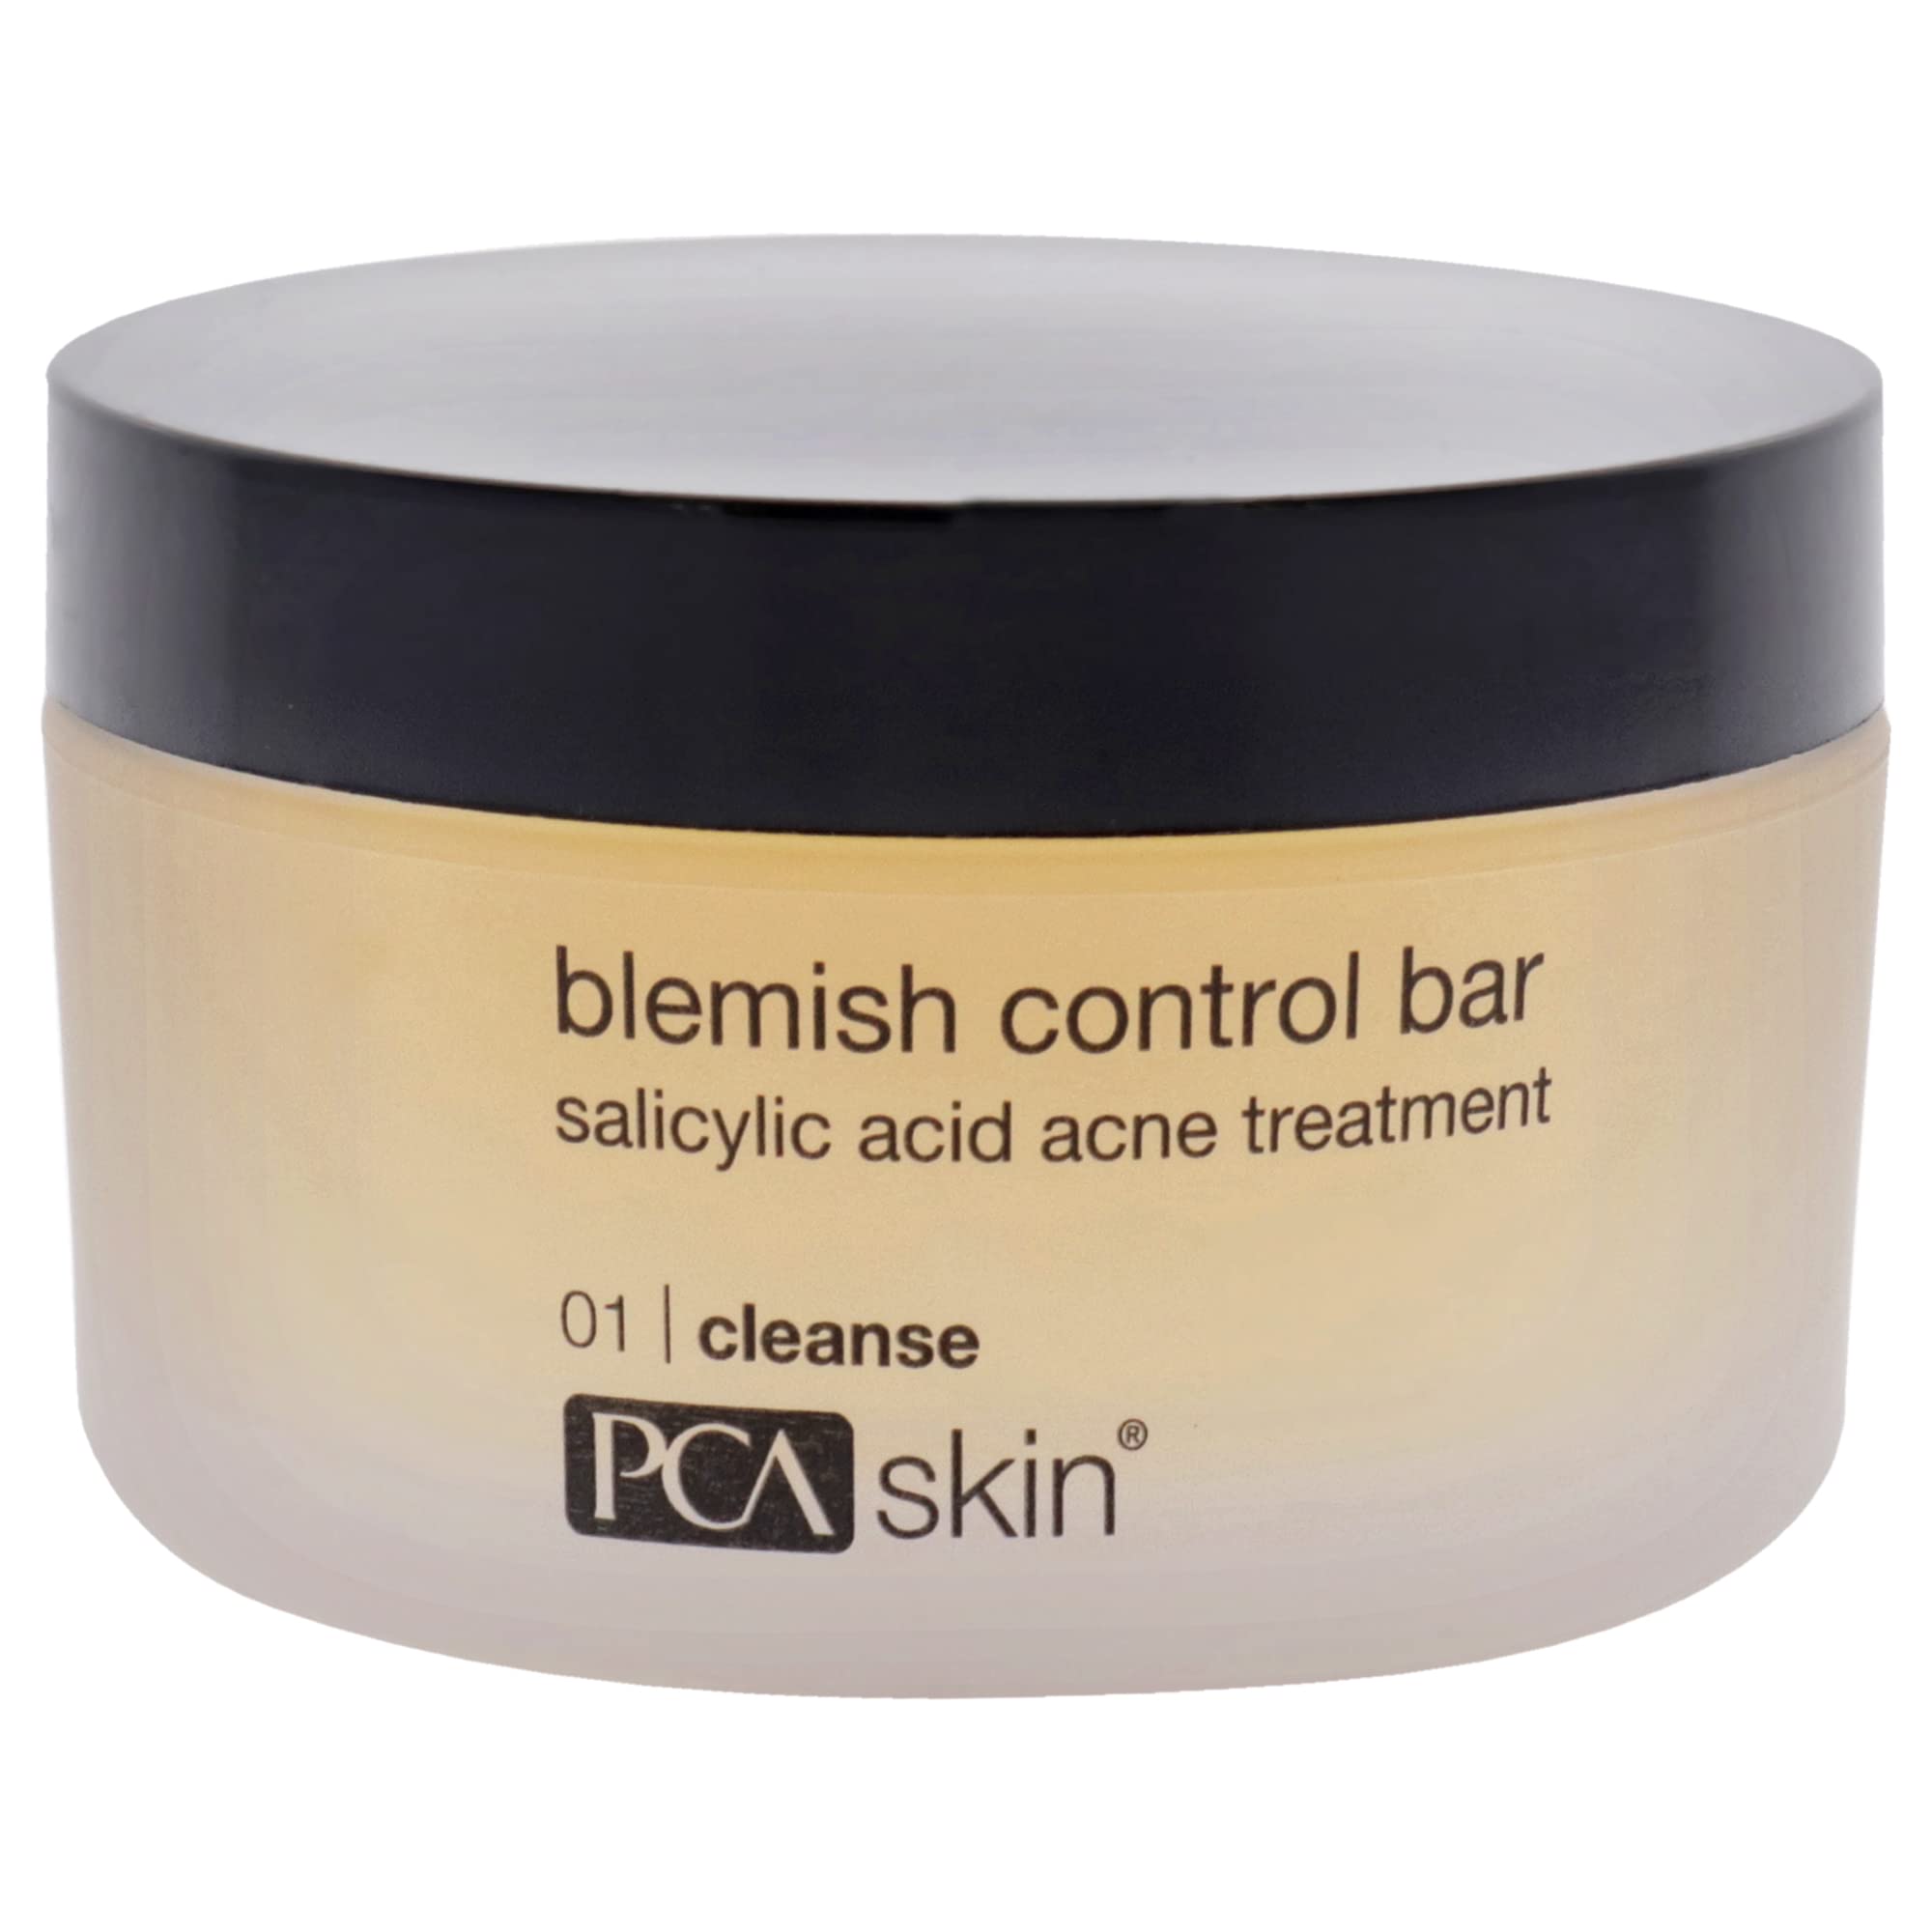 PCA SKIN Blemish Control Cleanser Bar - Face & Body Wash with Glycerin & 2% Salicylic Acid Treatment for Oily, Combination & Acne Prone Skin (3.2 oz)